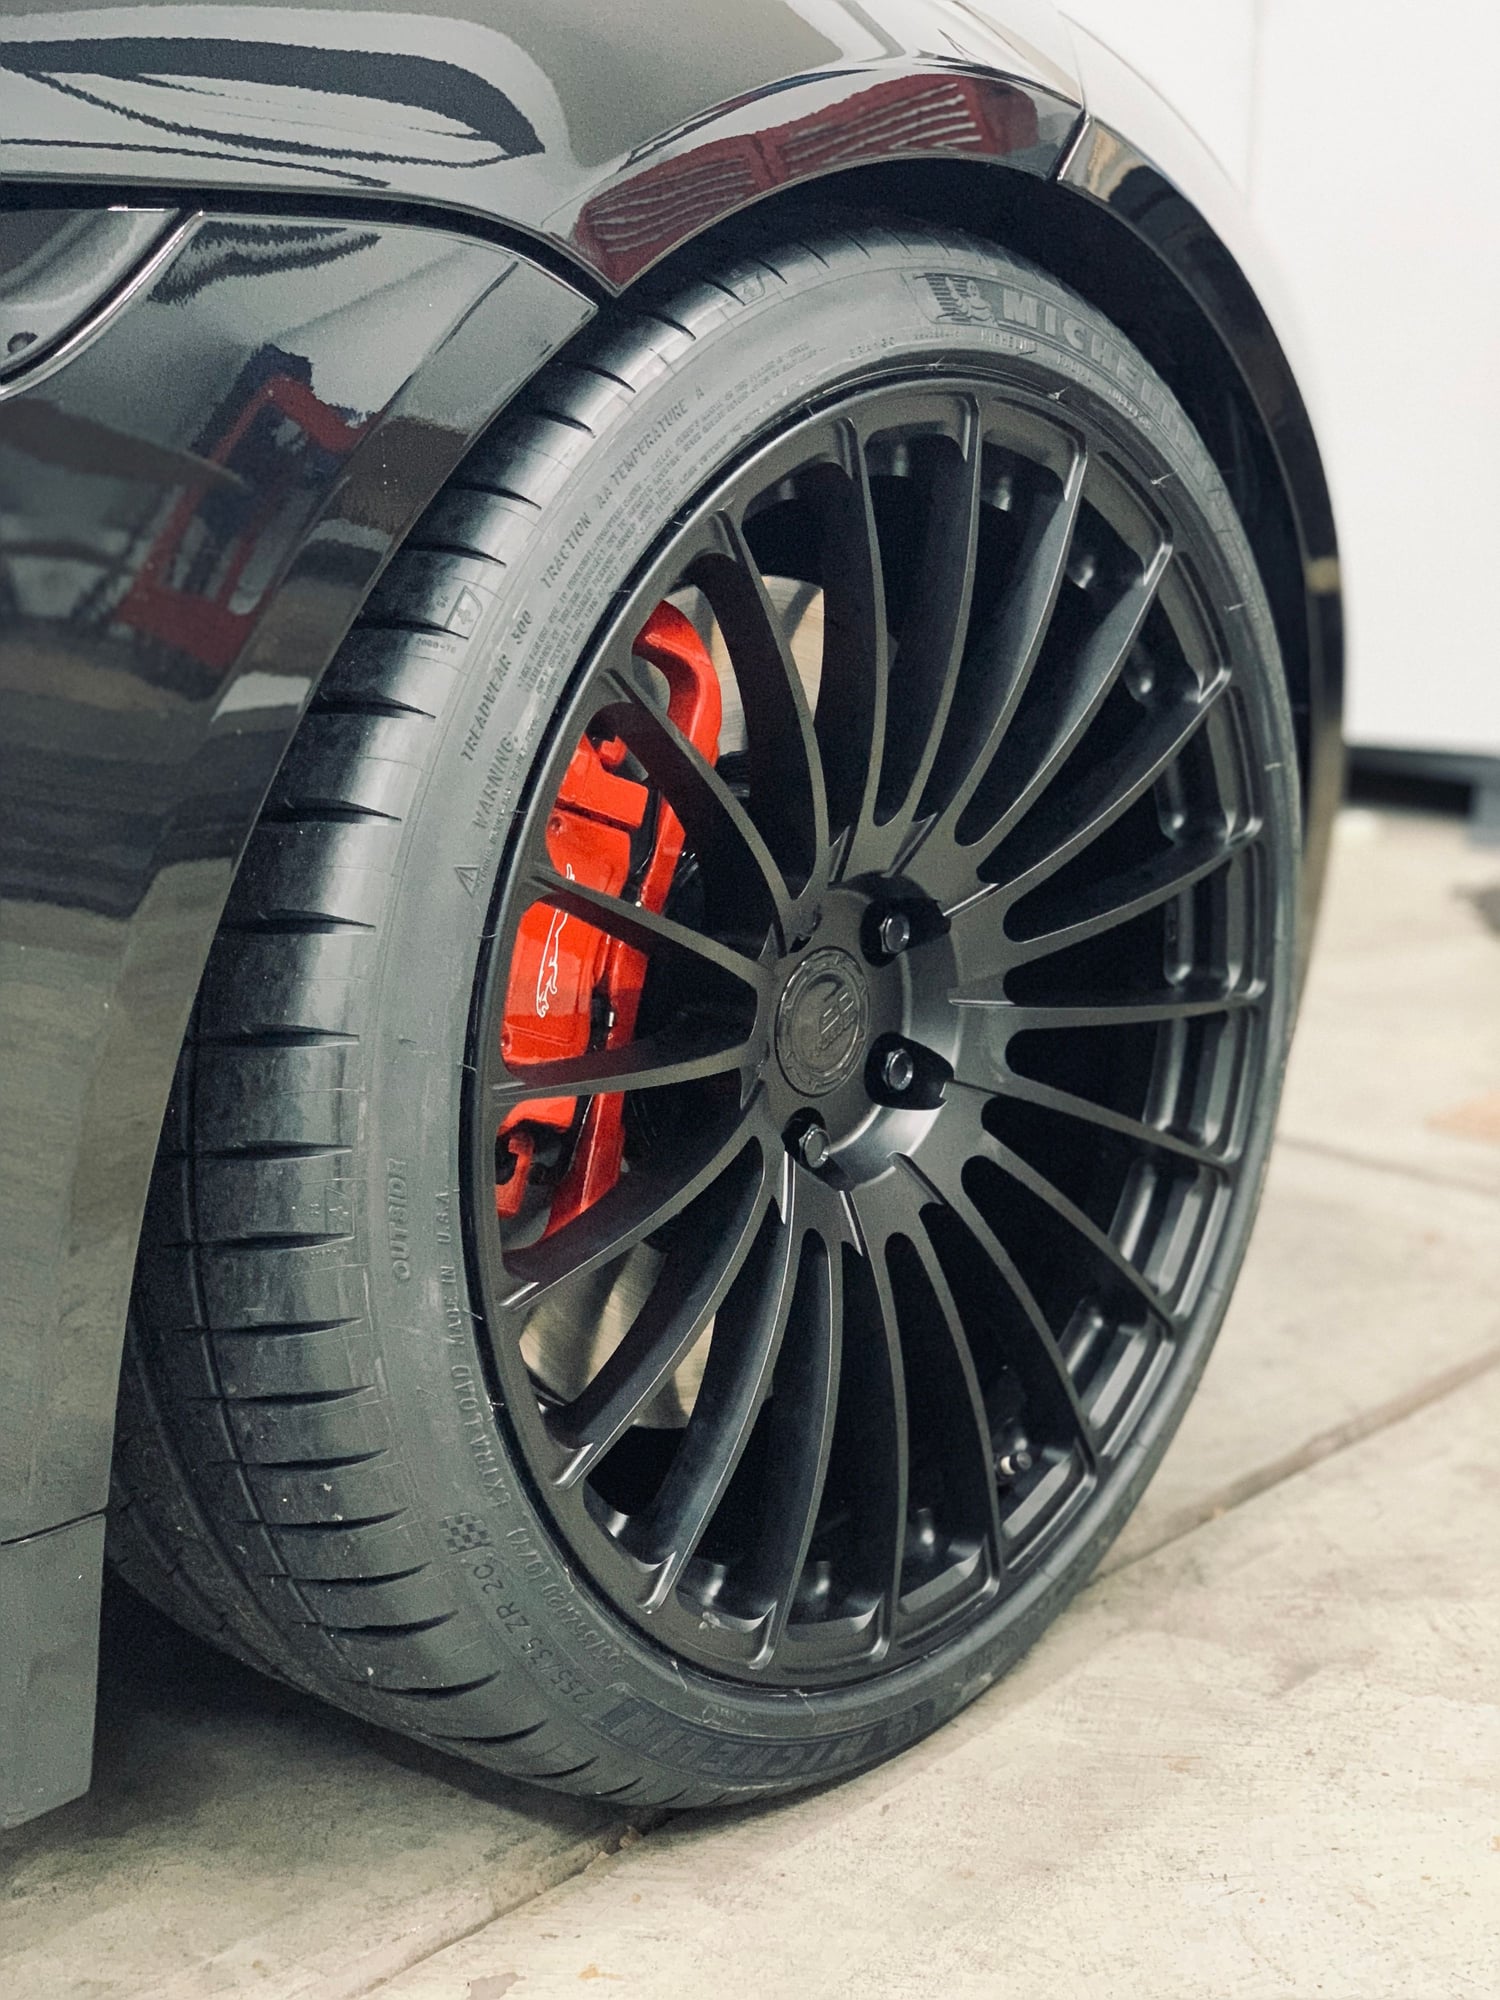 Wheels and Tires/Axles - [TRADE] BC Forged wheels + tires for your OE wheels + tires - Used - Pleasanton, CA 94566, United States